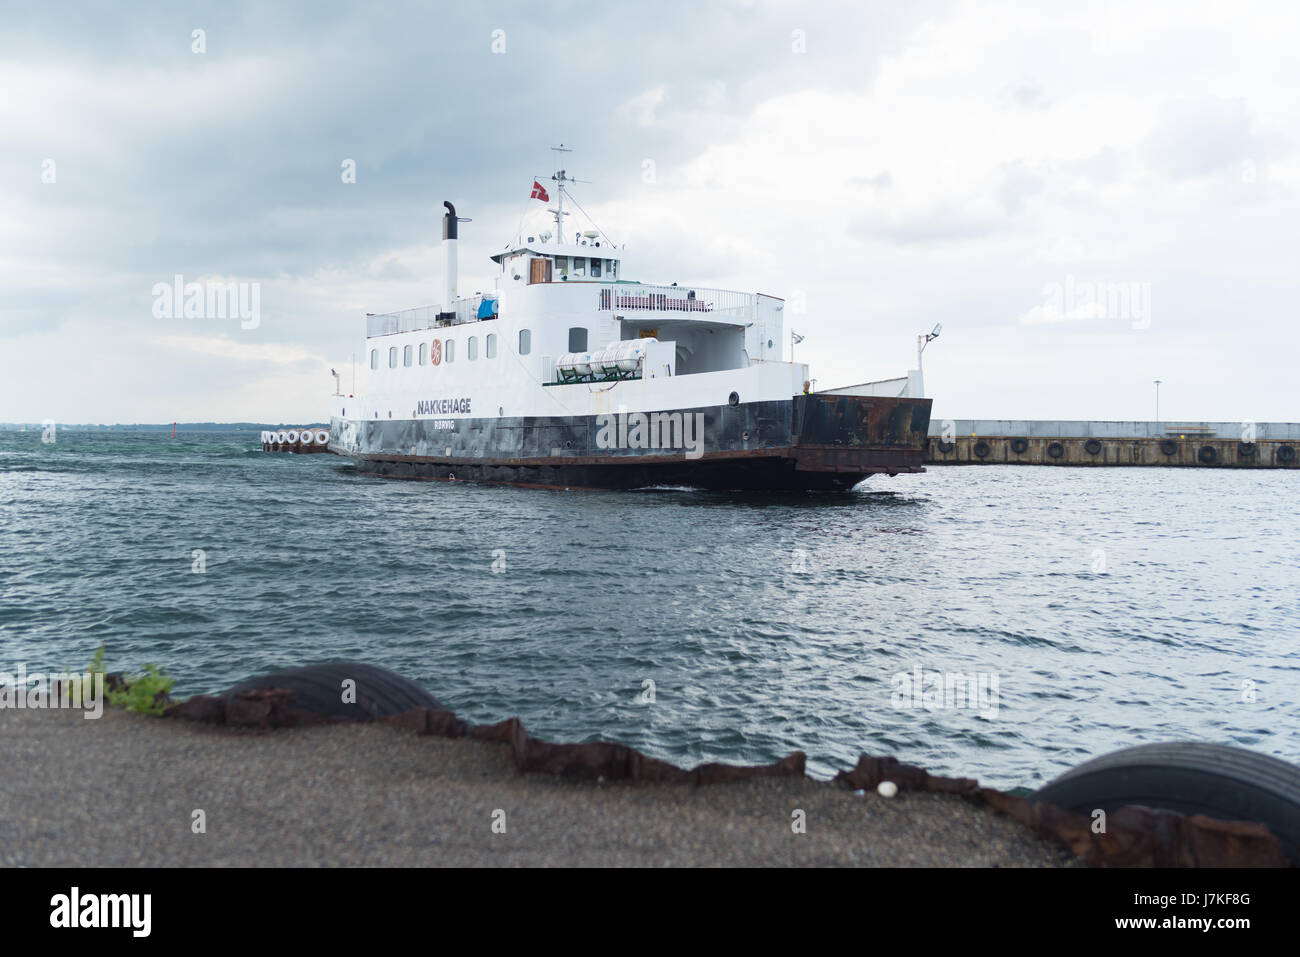 HUNDESTED, DENMARK - AUGUST 8, 2016: Arrival of the ferry in Hundested, a small town in the northern of Zealand Stock Photo